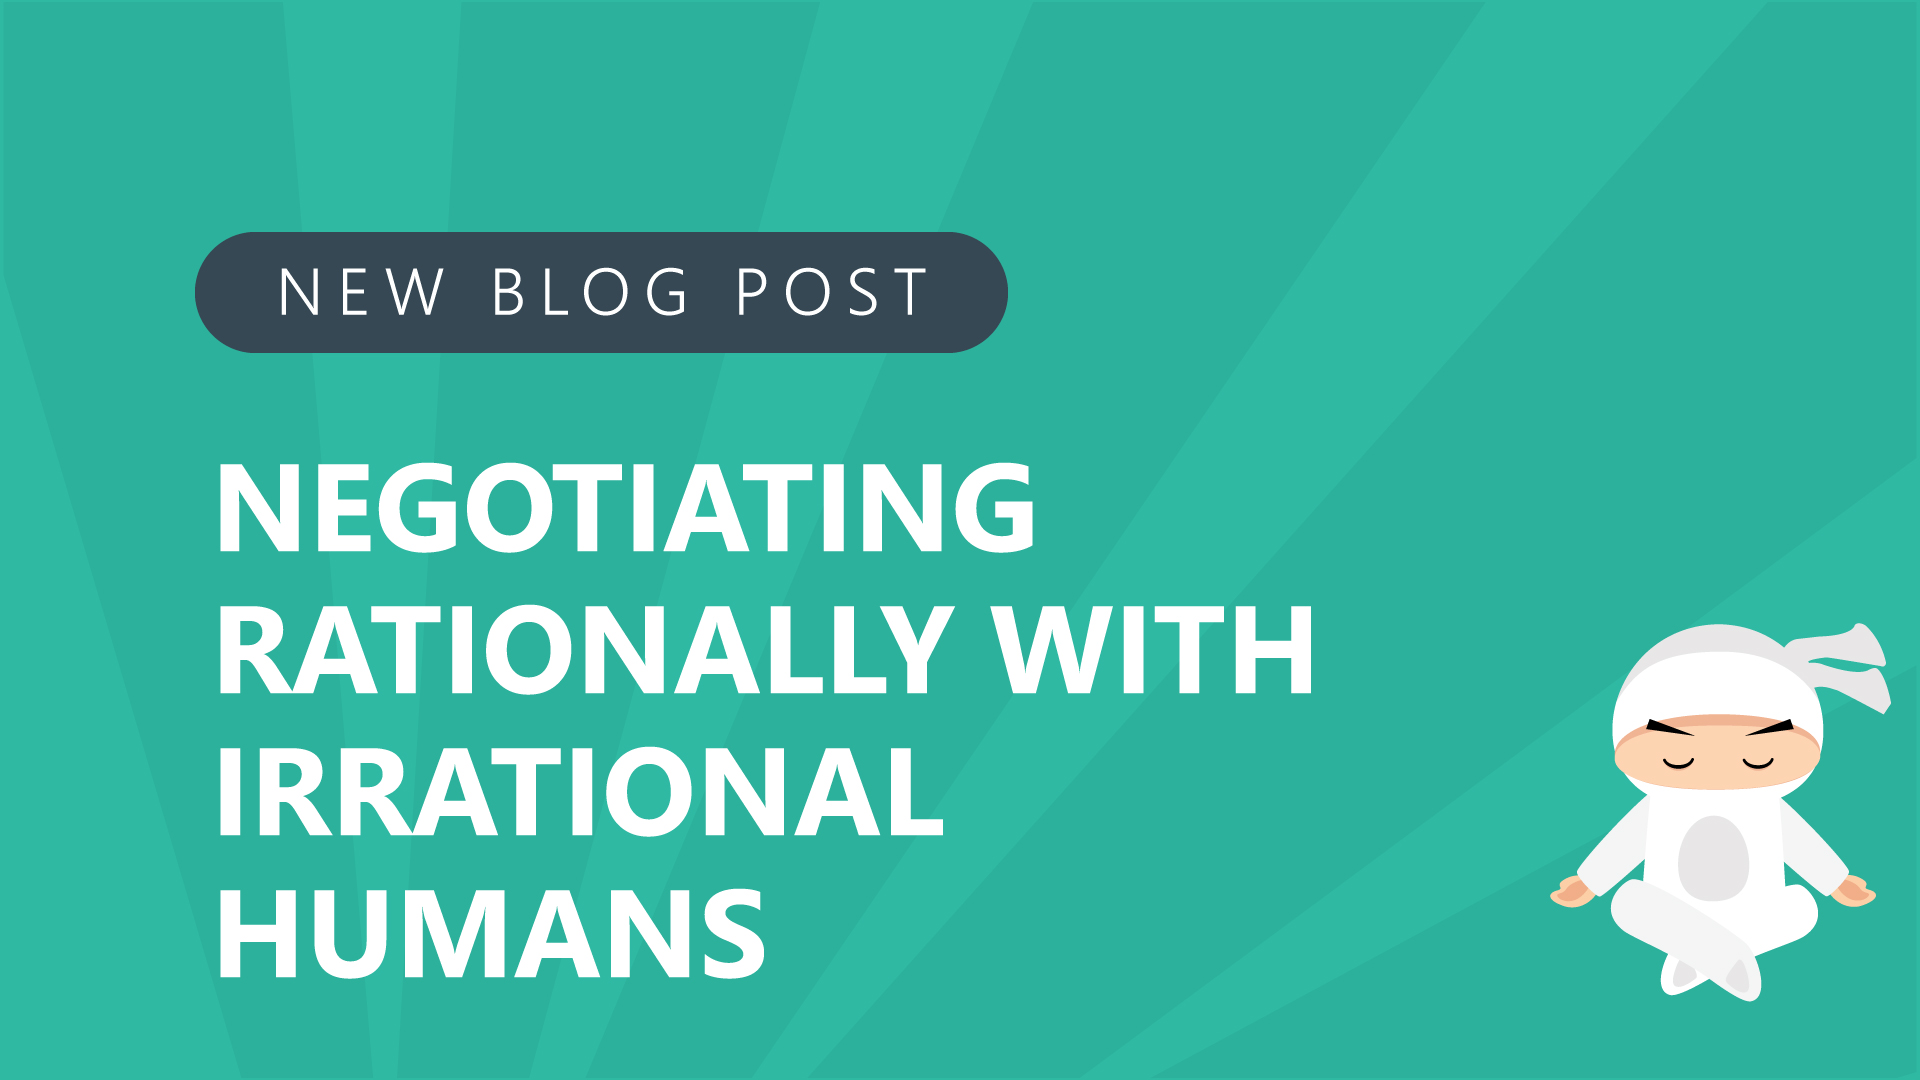 Negotiating rationally with irrational humans